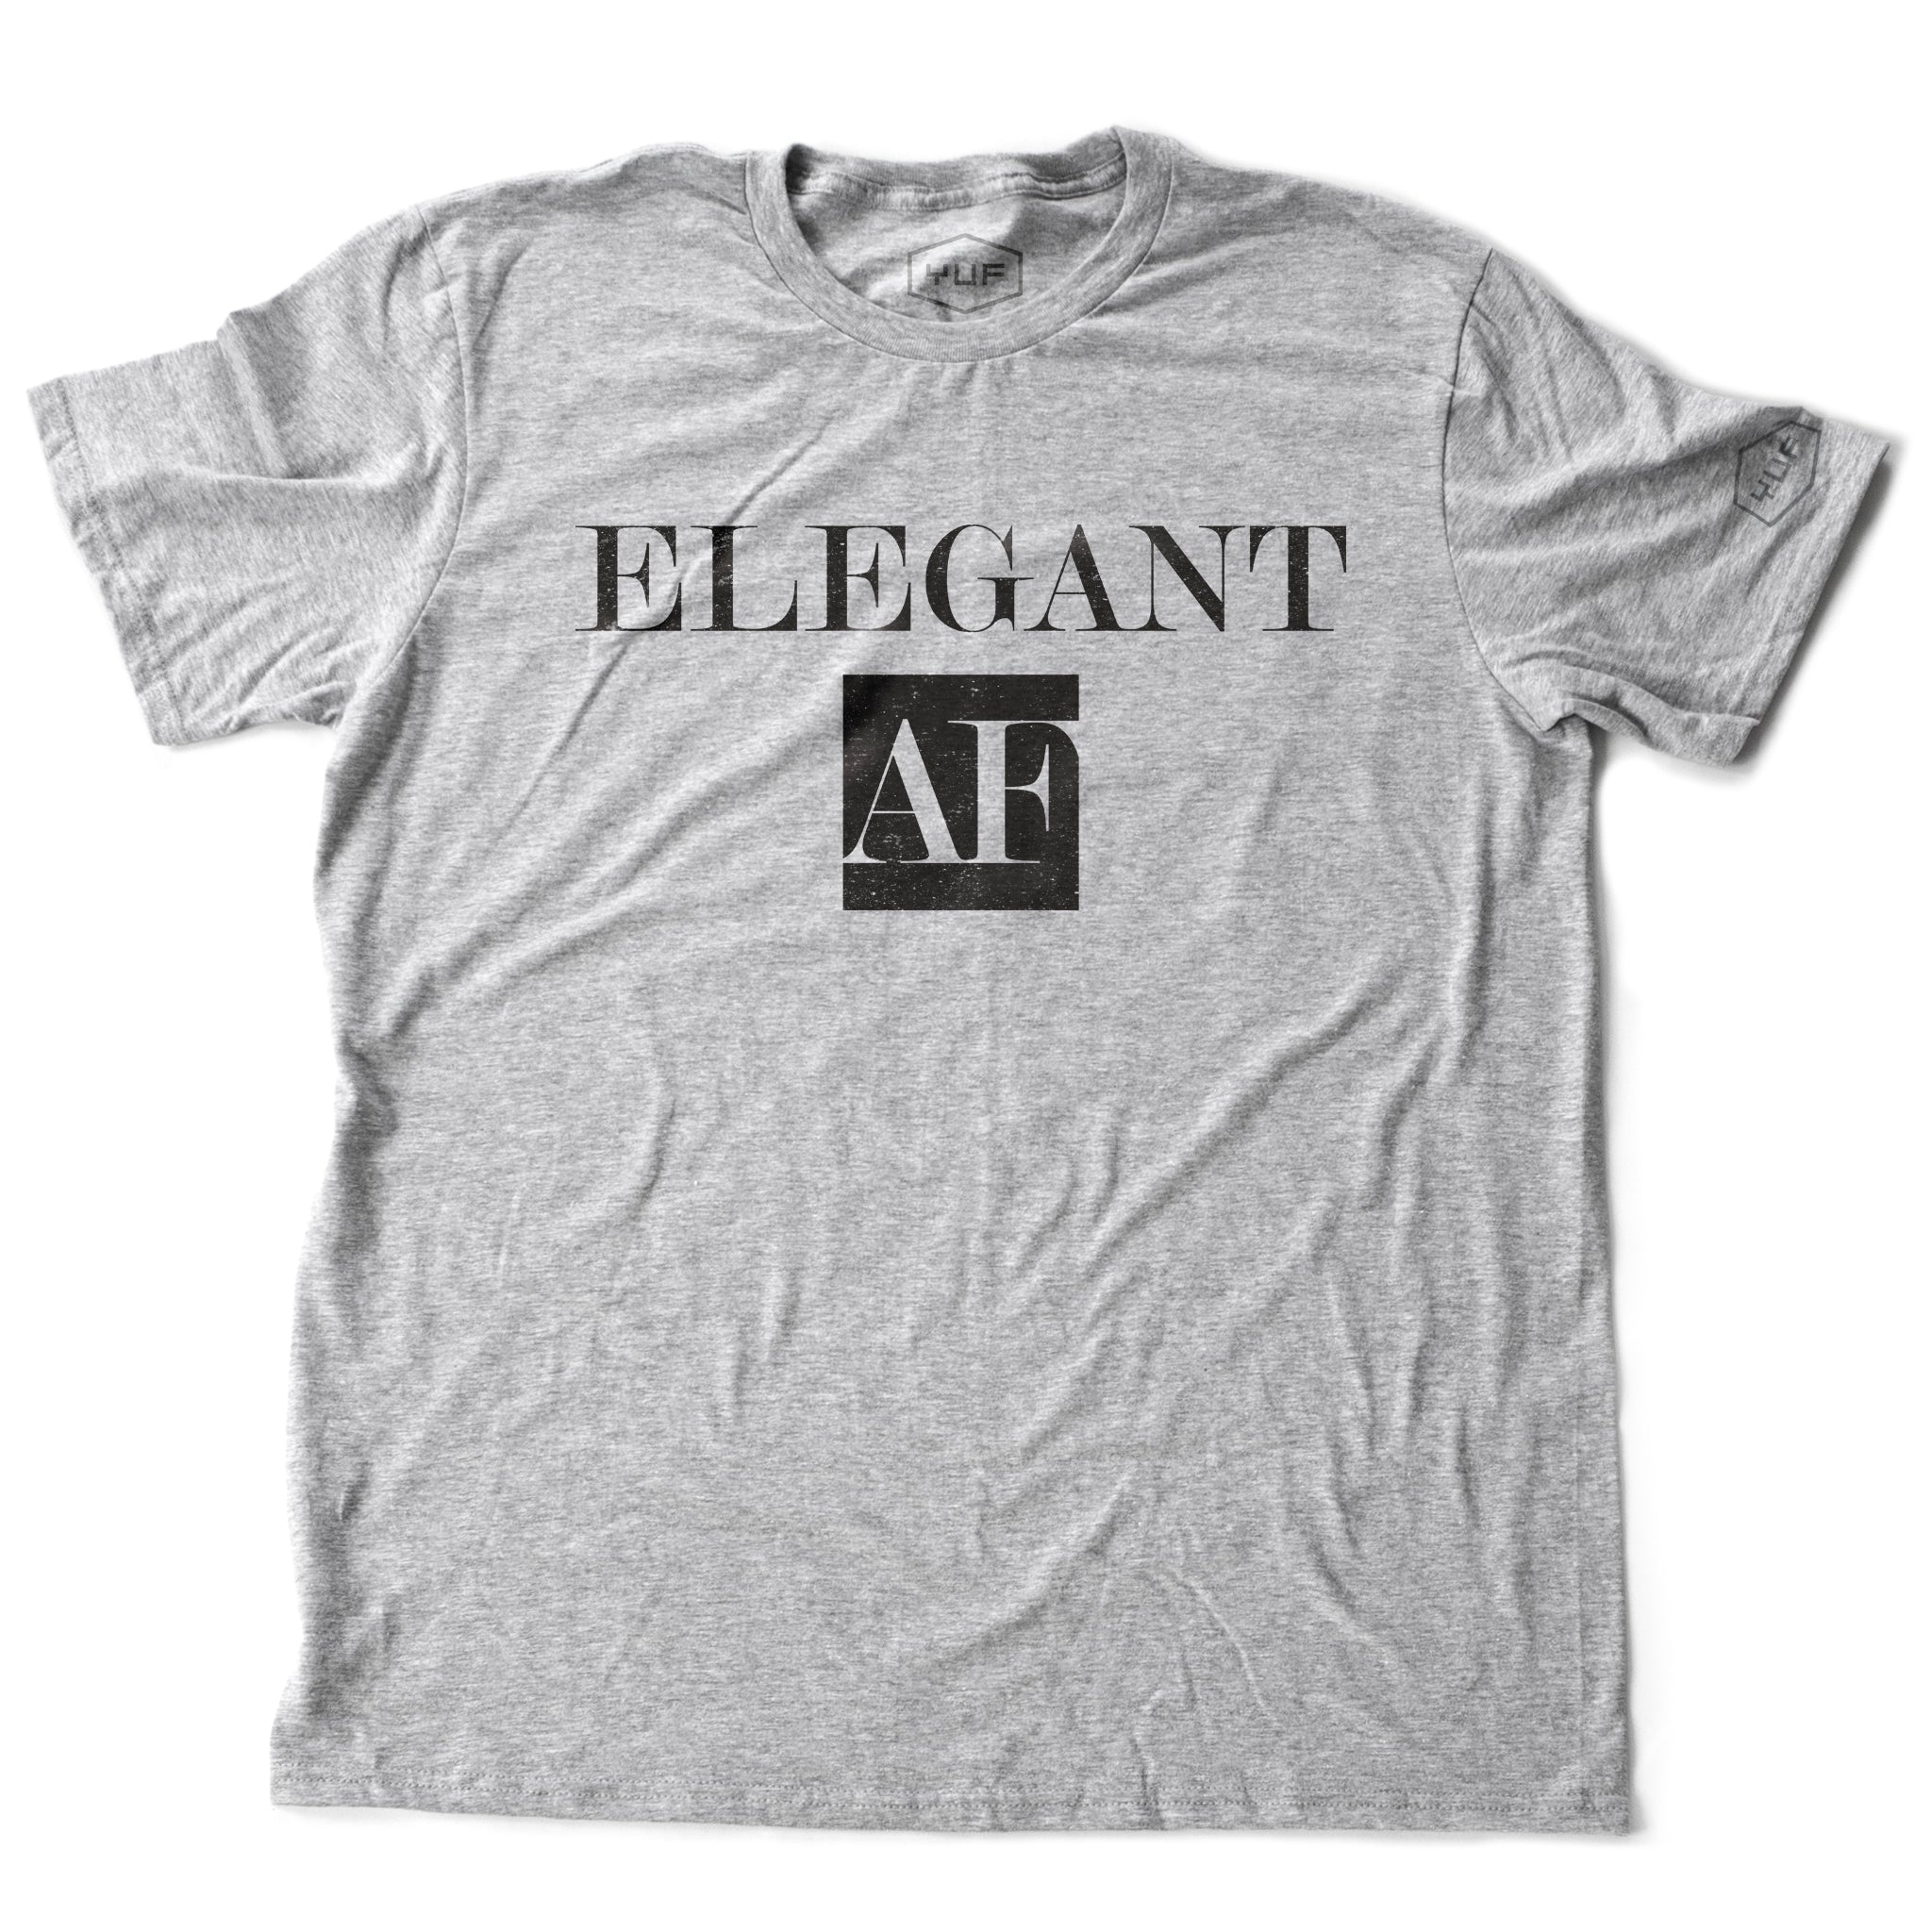 A heather gray t-shirt with the sarcastic, meme-influenced typographic “ELEGANT AF” — By fashion brand YUF, from wolfsaint.net